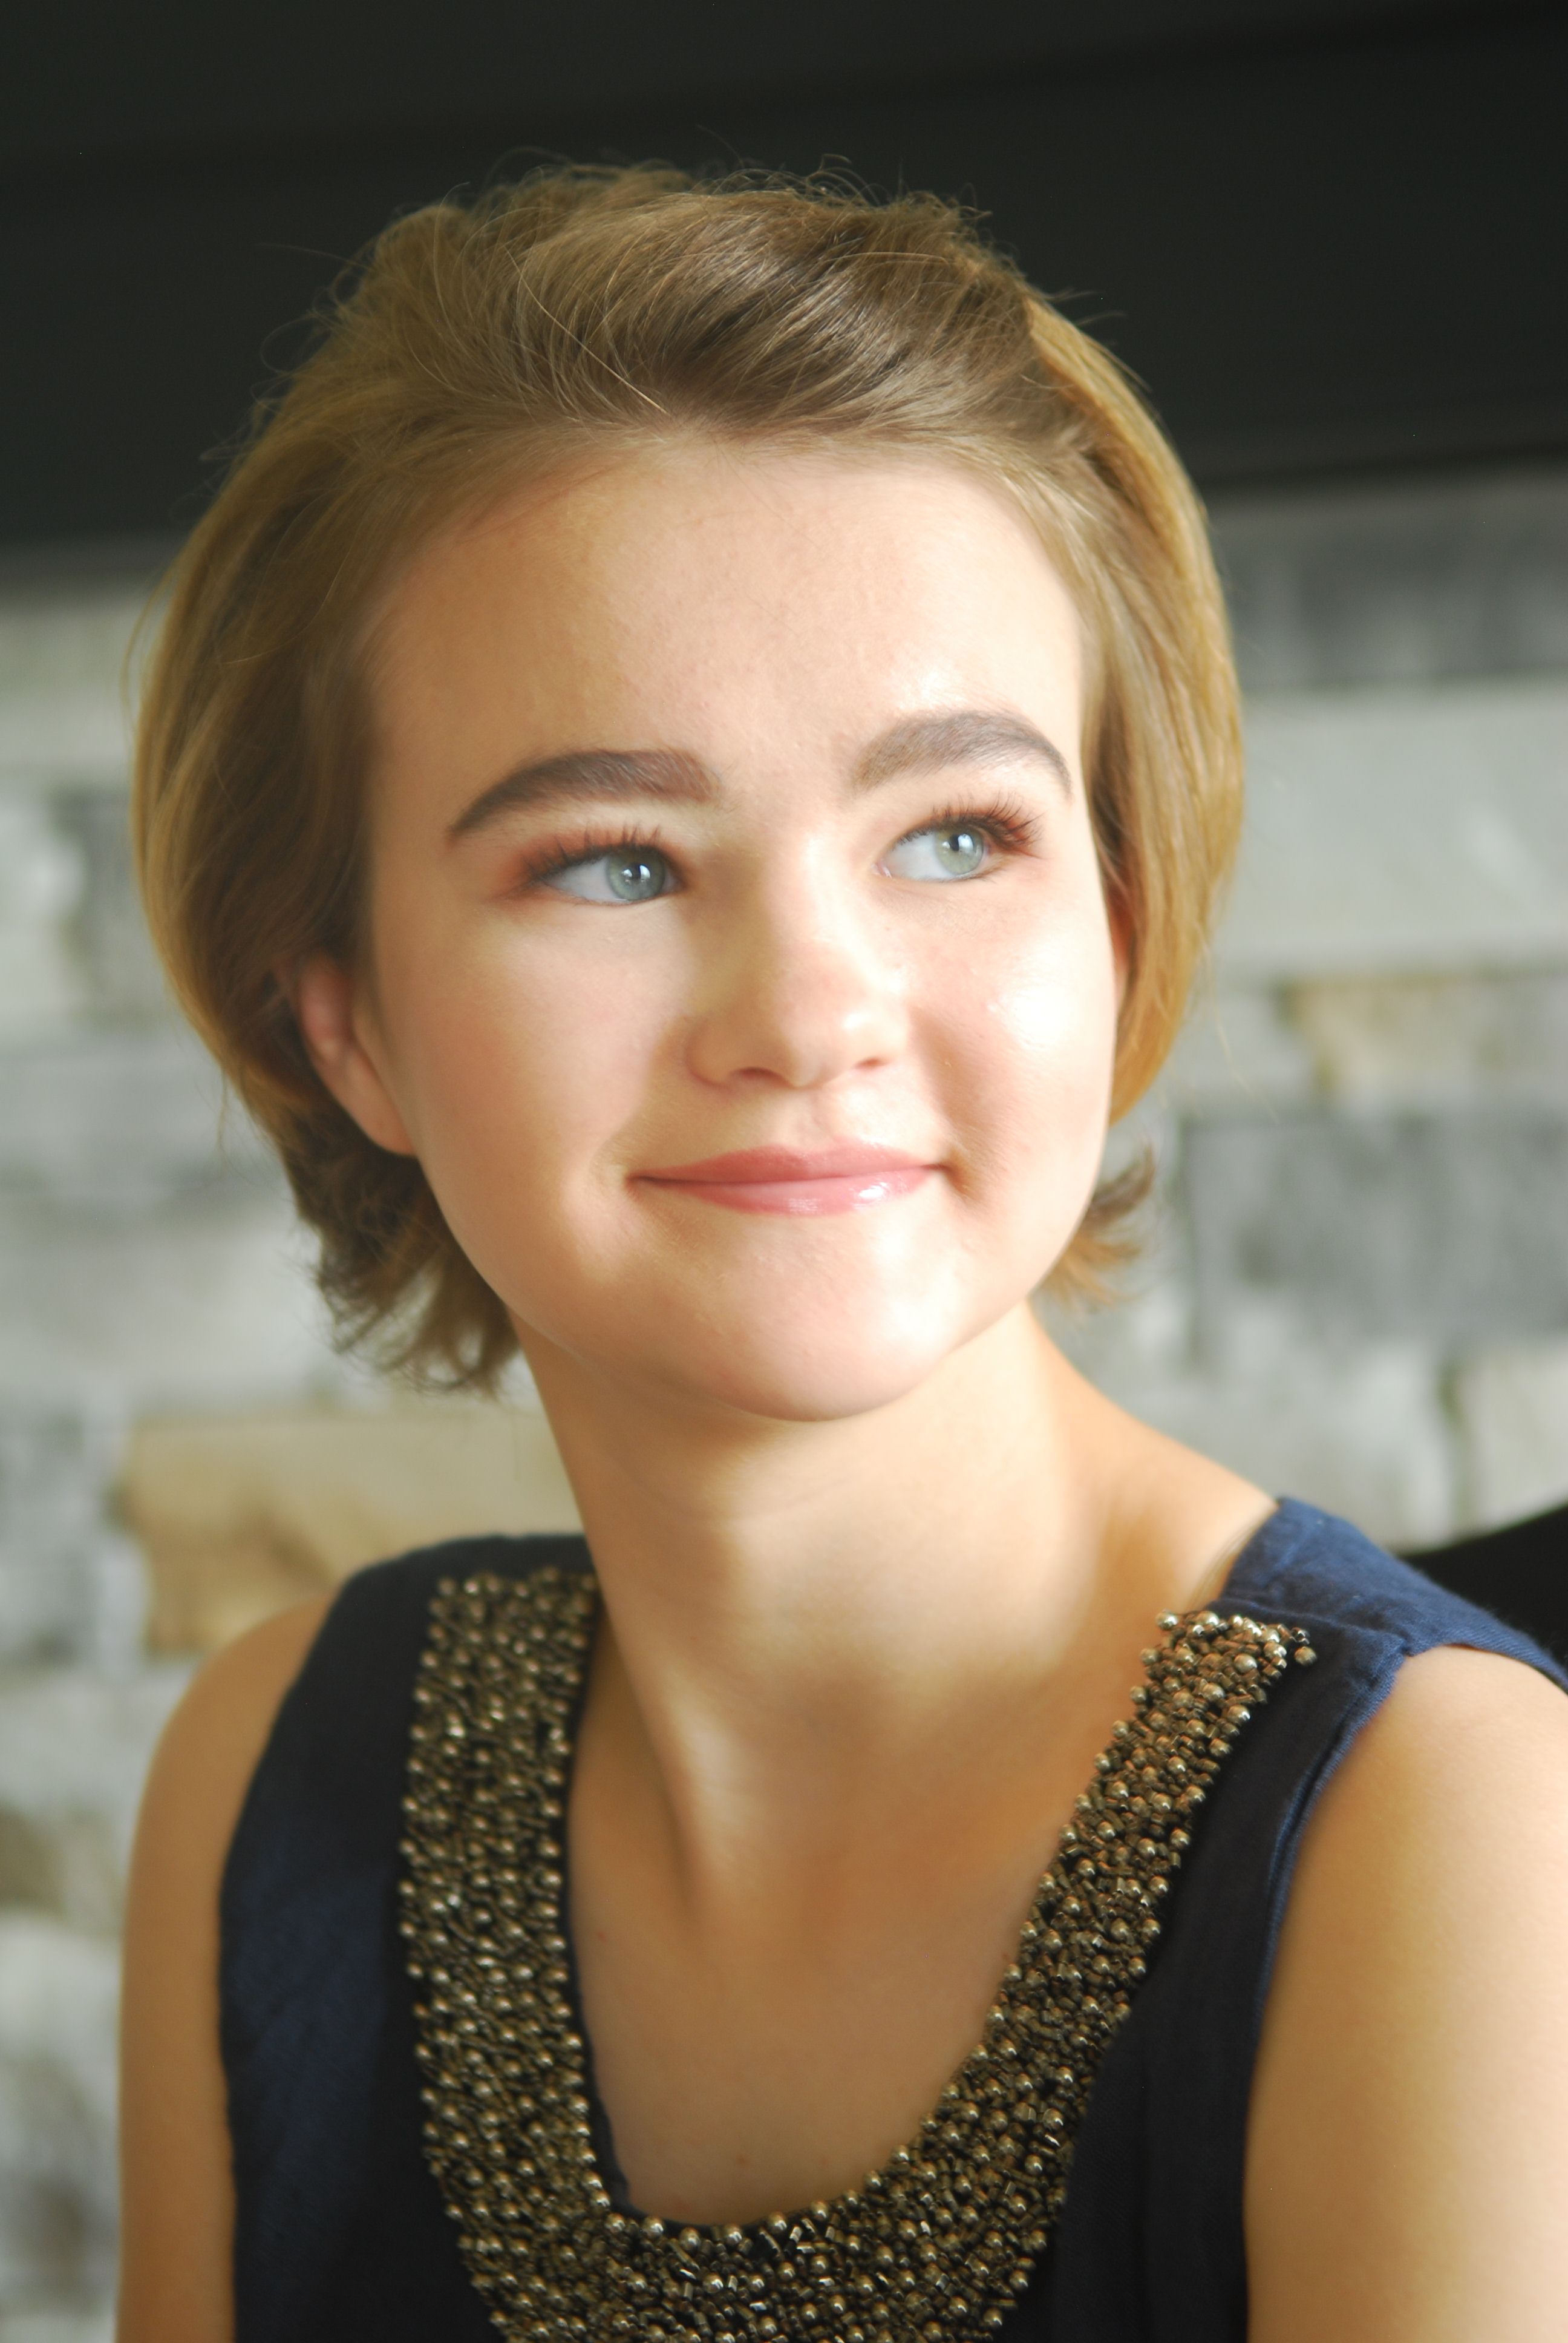 Millicent simmonds and howie seago will be at the film screening! 